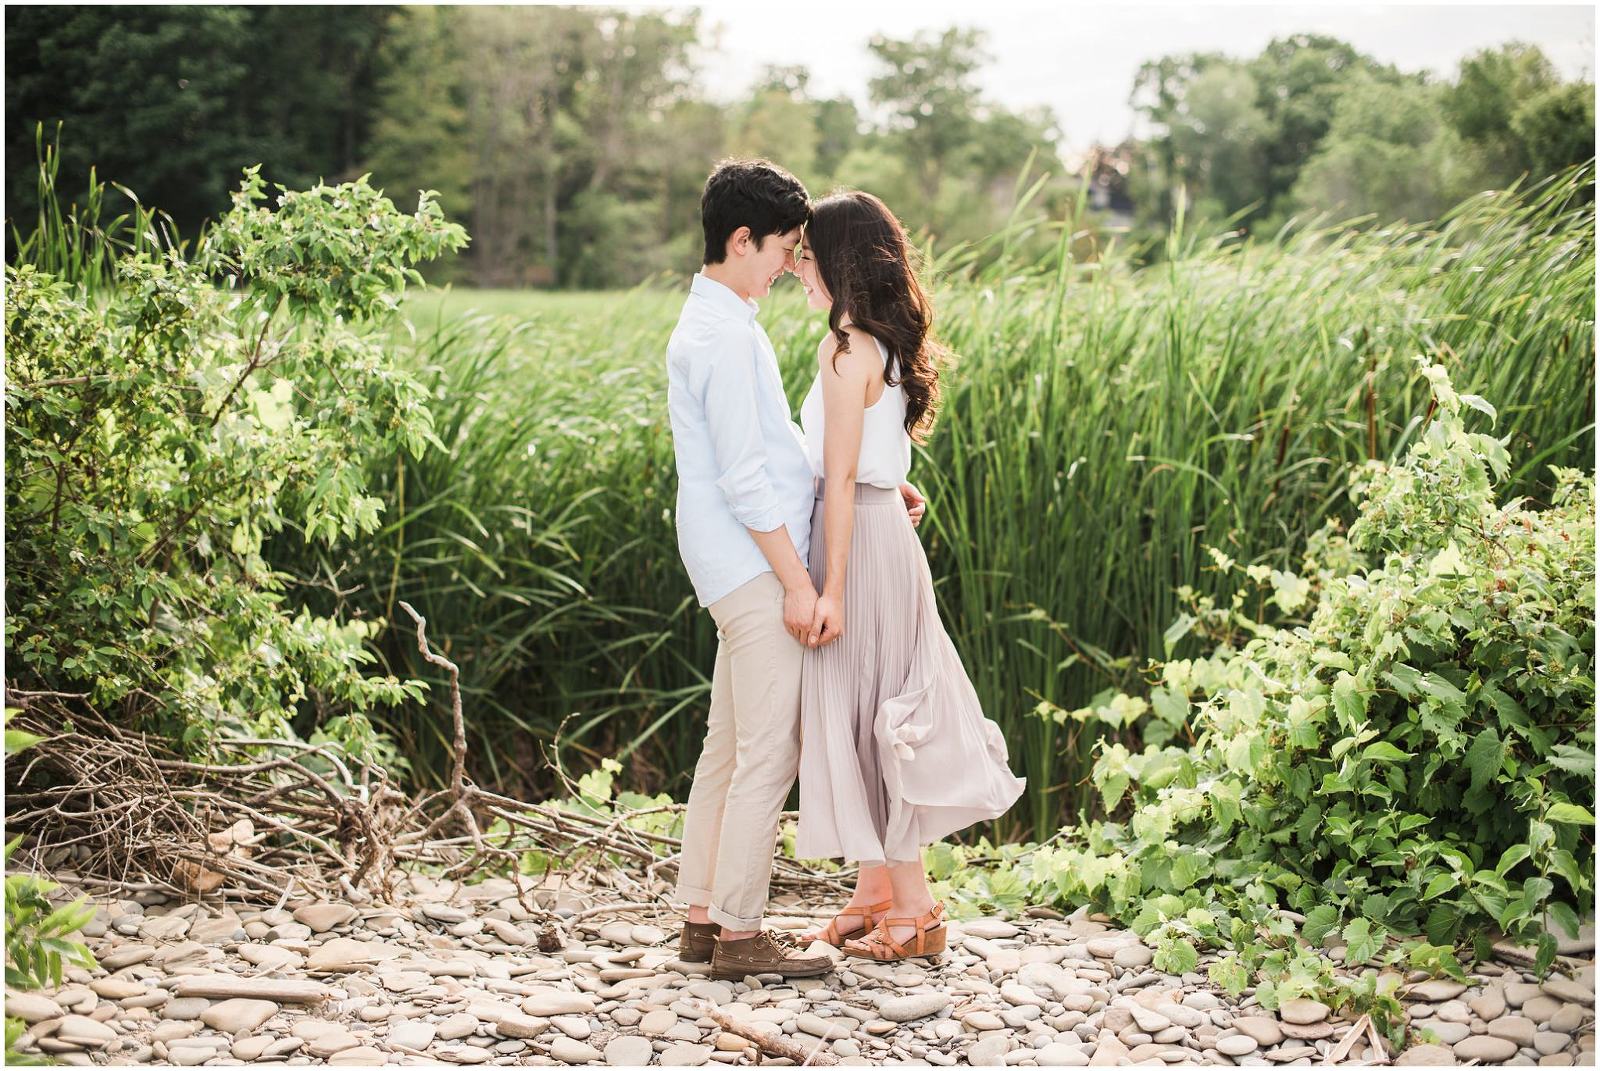 An asian couple embracing each other in front of the tall bright green reeds of a marsh